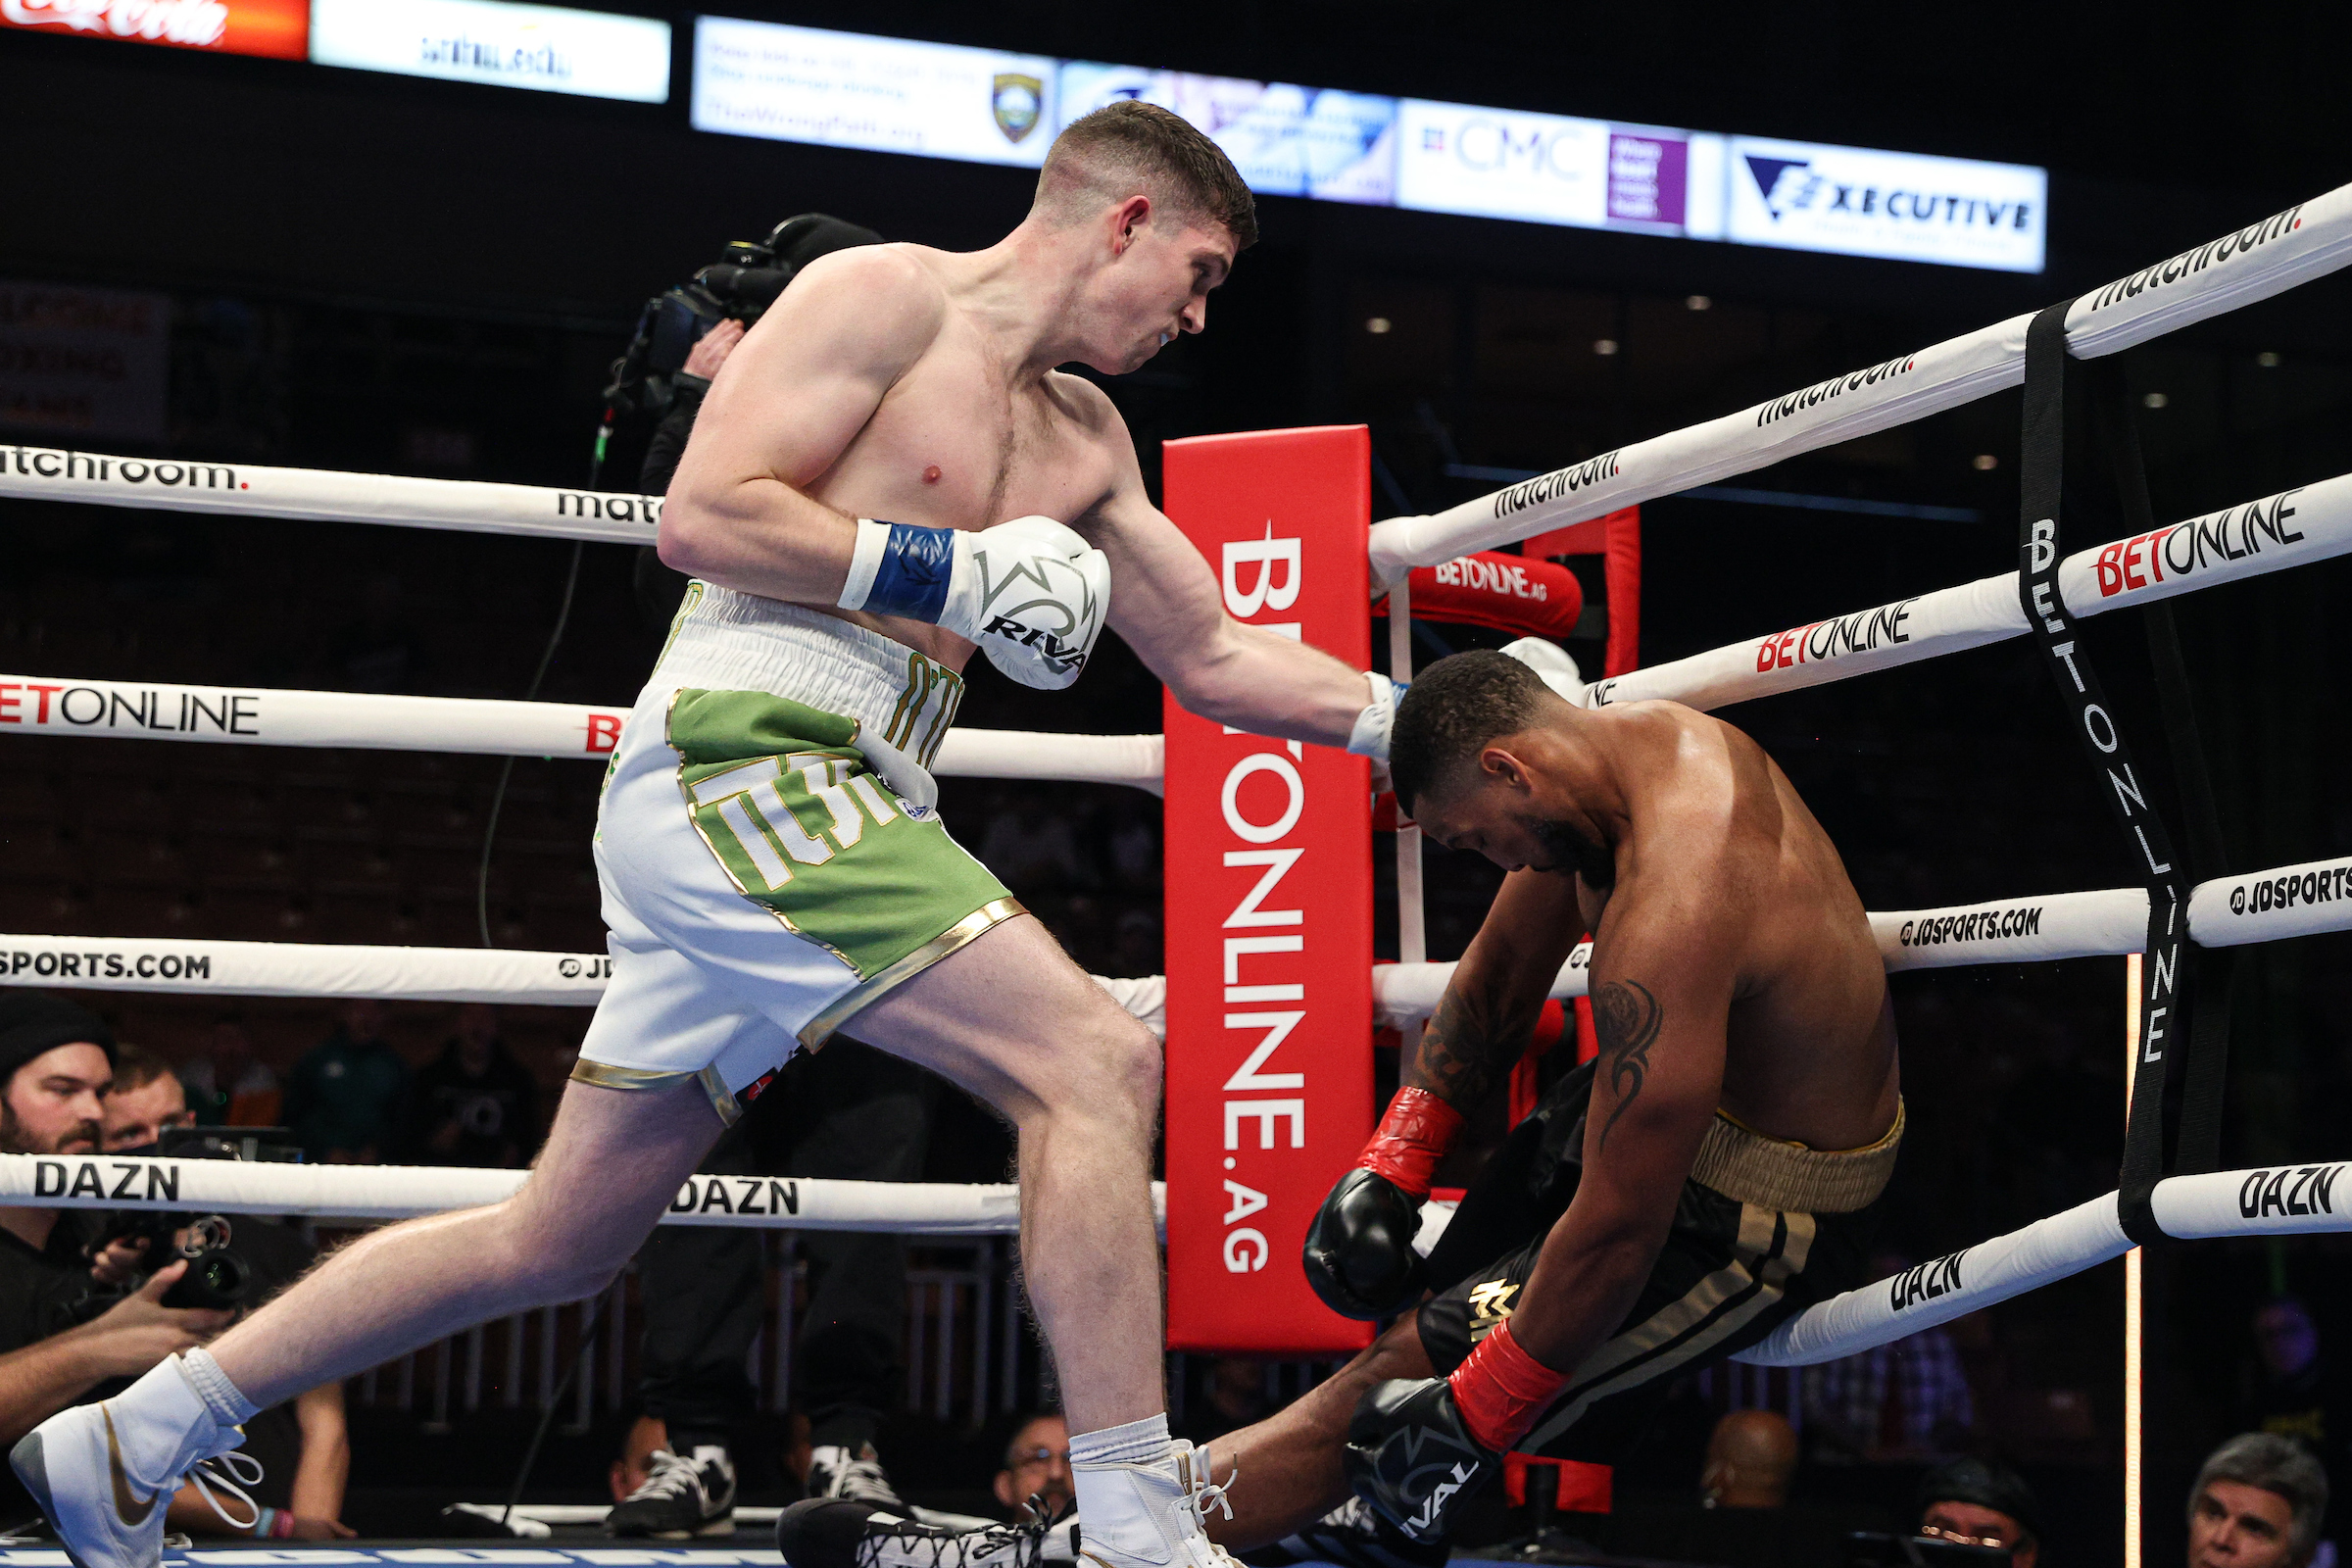 Thomas O’Toole knocks out Mark Malone during their Matchroom Boxing bout at the SNHU Arena in Manchester, NH on November 19, 2021. (Credit: Ed Mulholland/Matchroom)